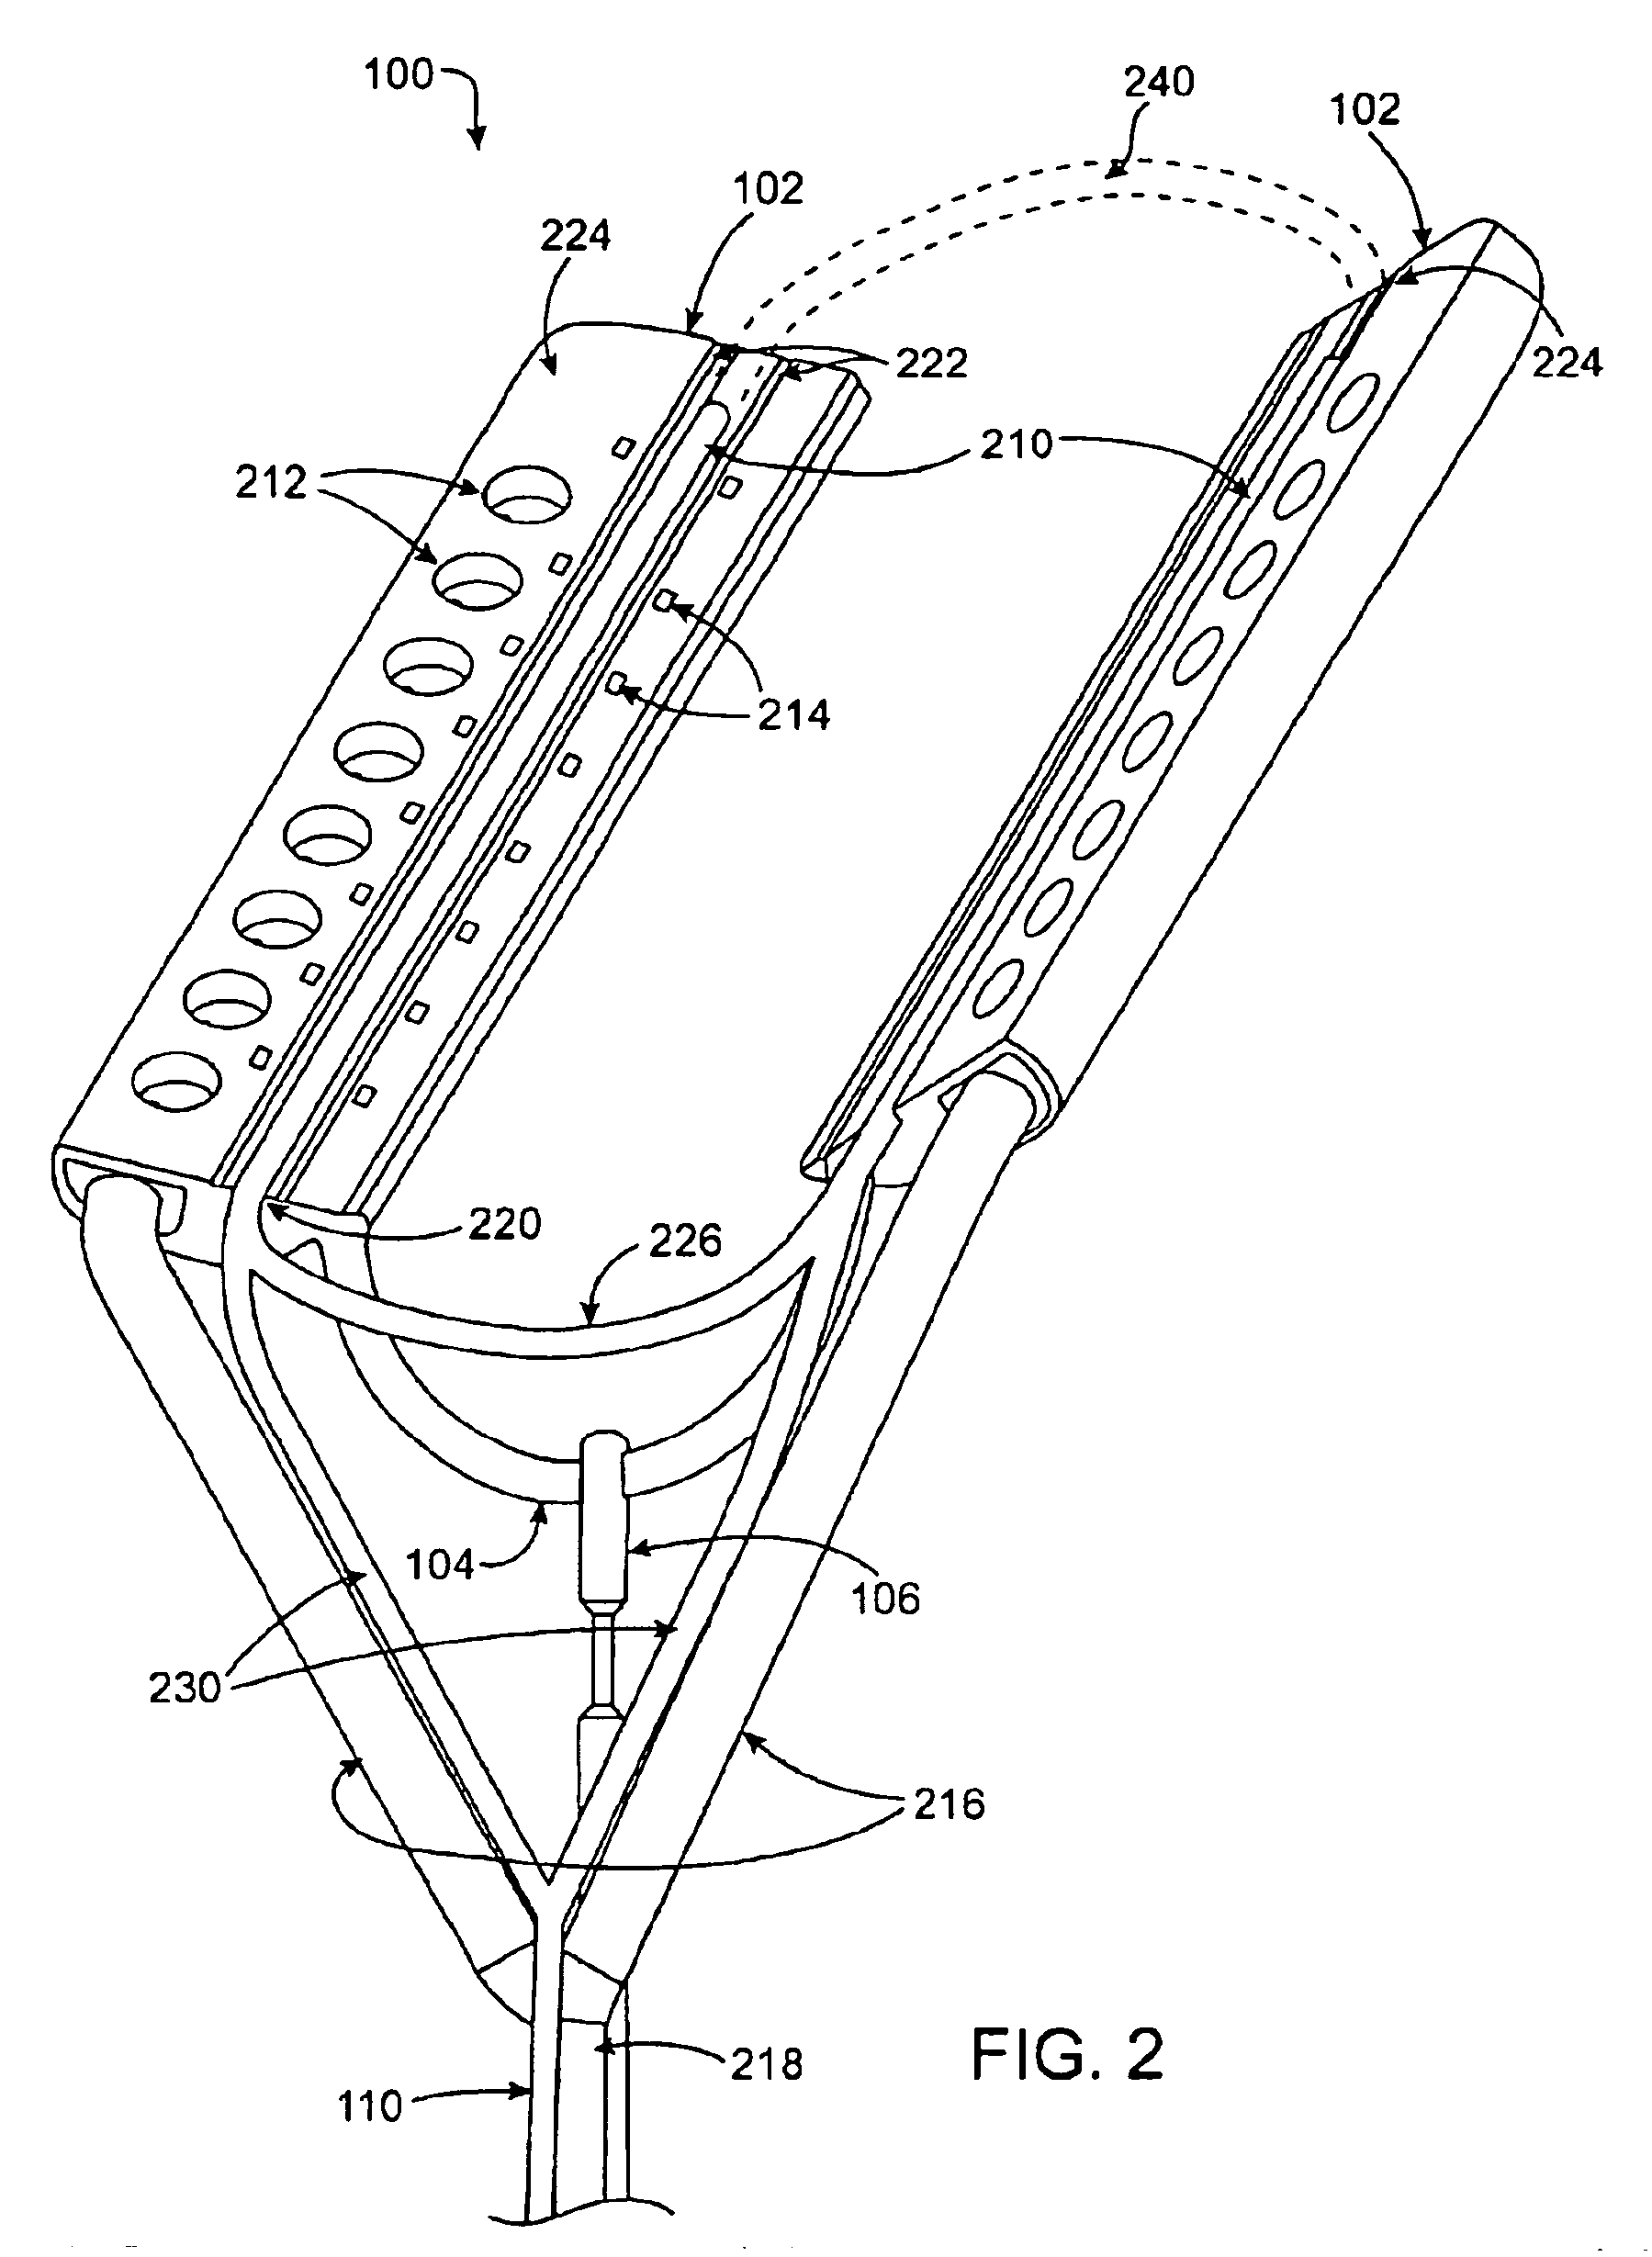 Conduction block verification probe and method of use